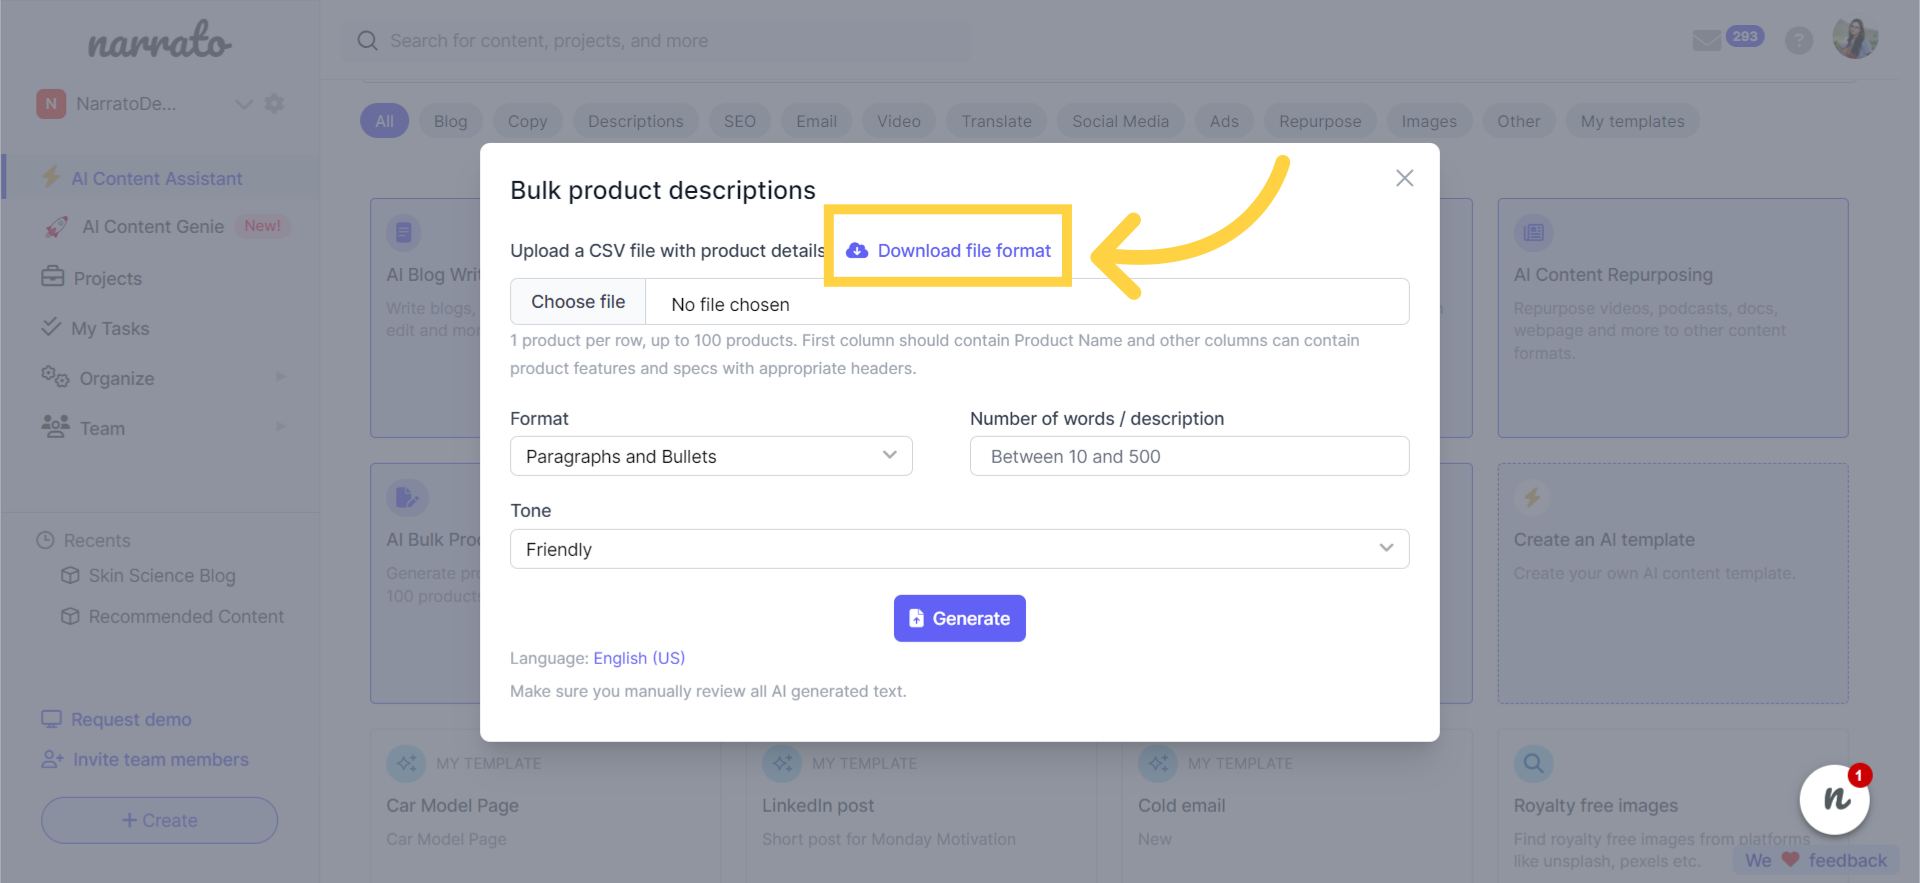 Download the CSV file template for filling in product descriptions